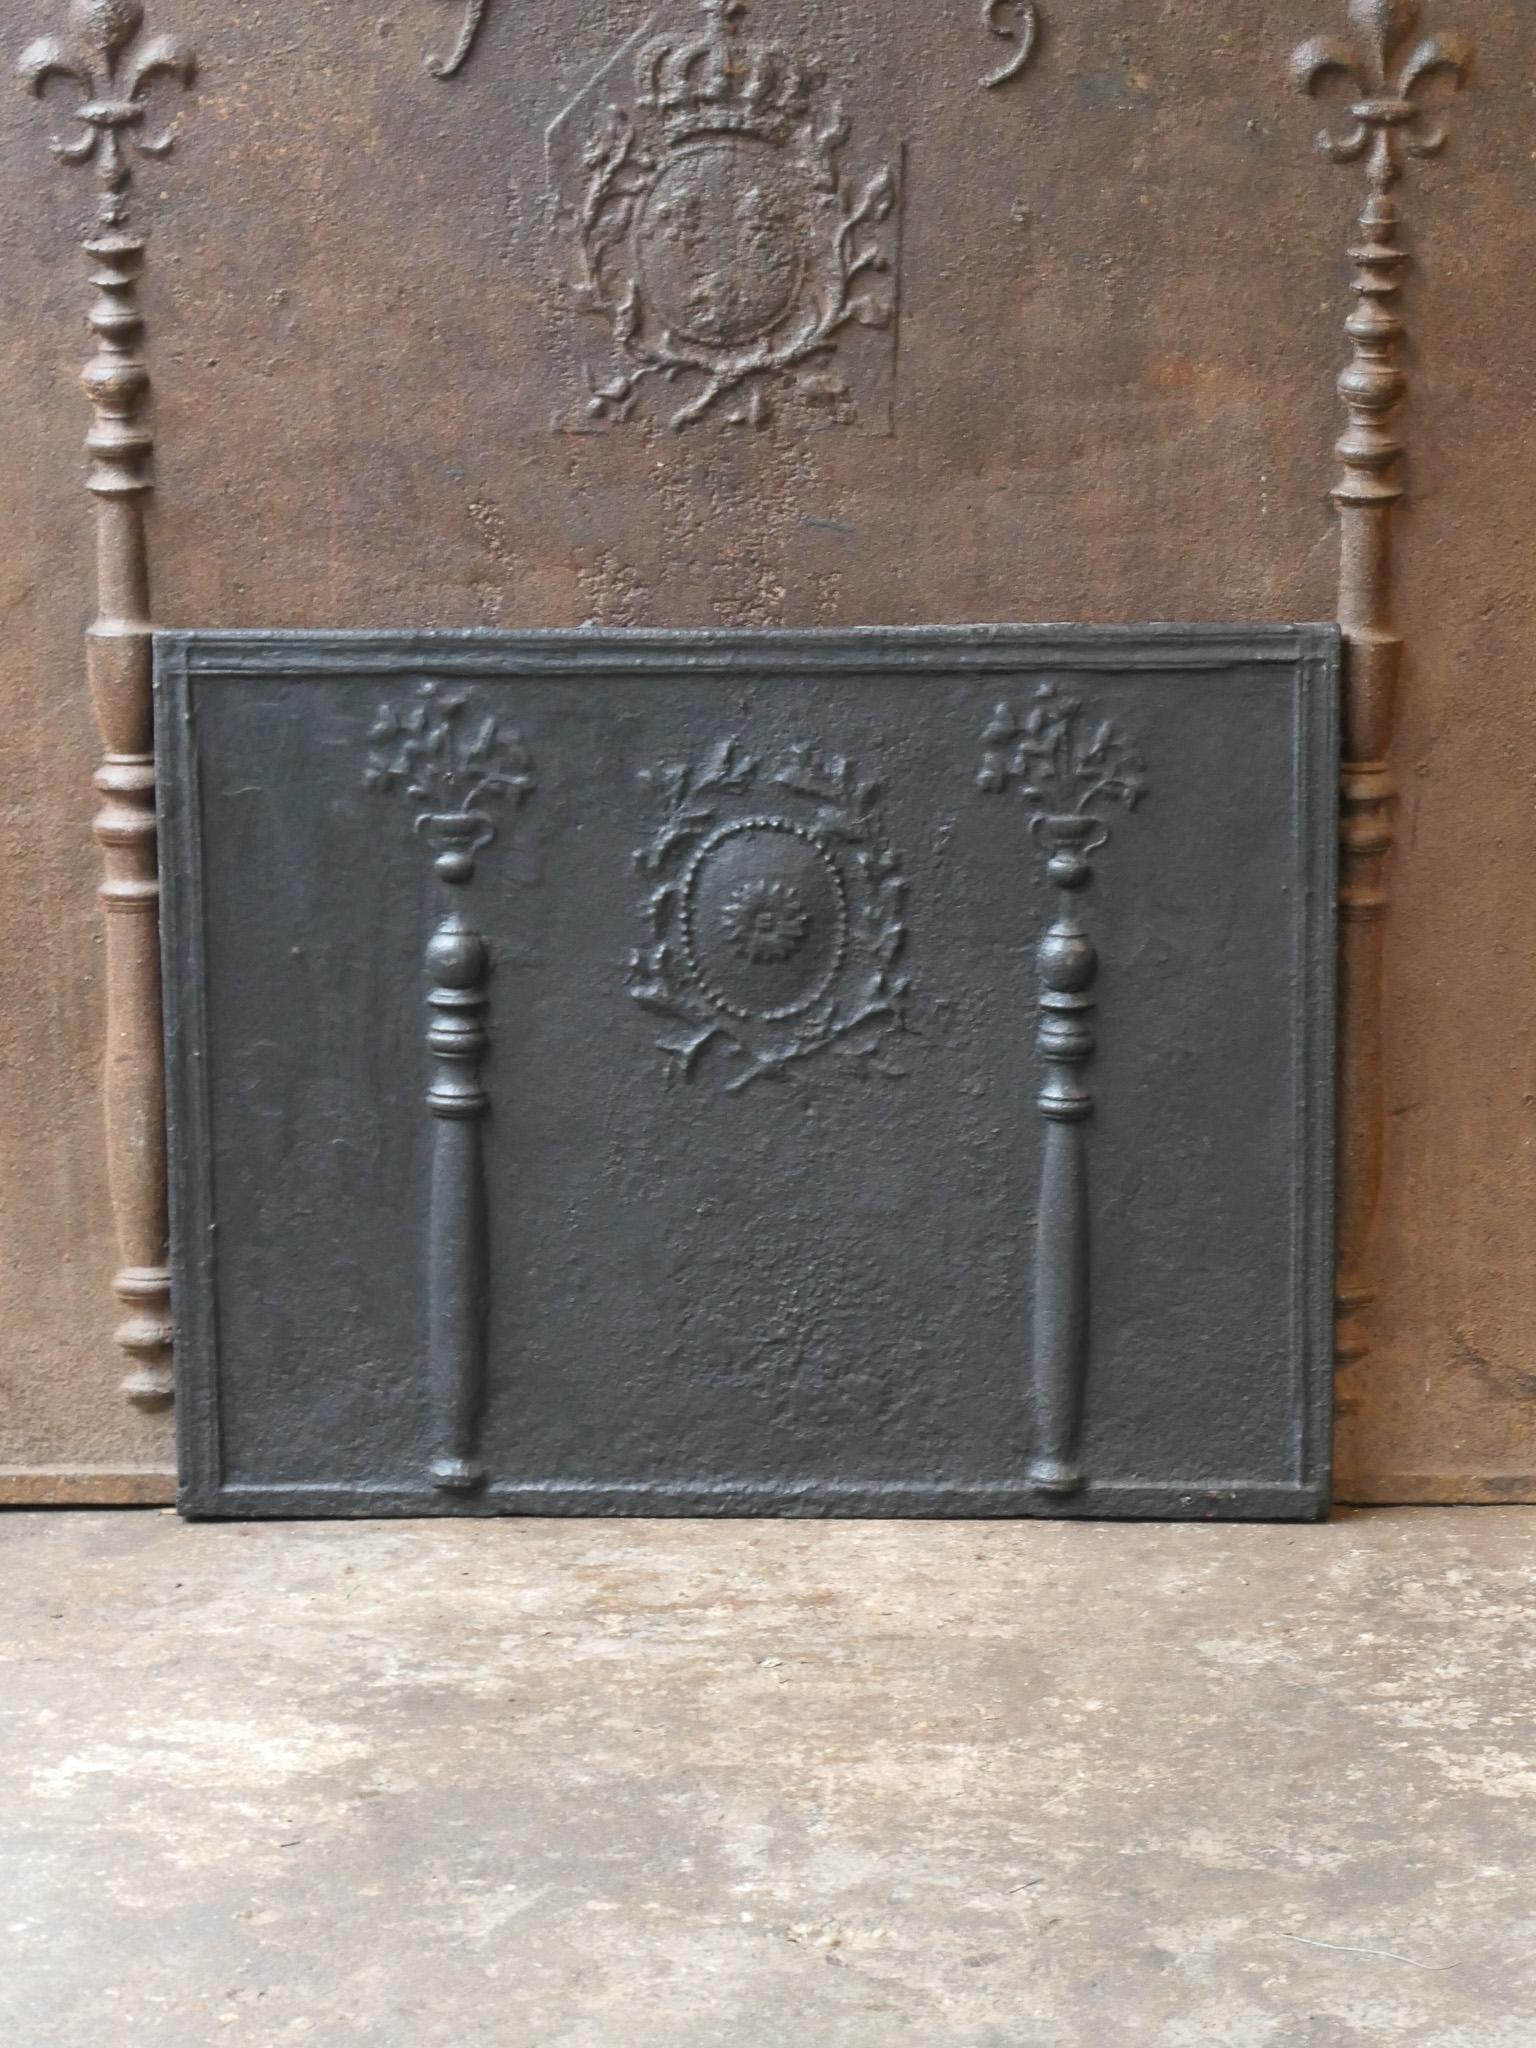 Beautiful 18th century French Neoclassical fireback with flower decorations and two pillars. The pillars refer to the club of Hercules and Stand for strength and the unknown. Towards the end of the 18th century and the start of the Louis XV style,